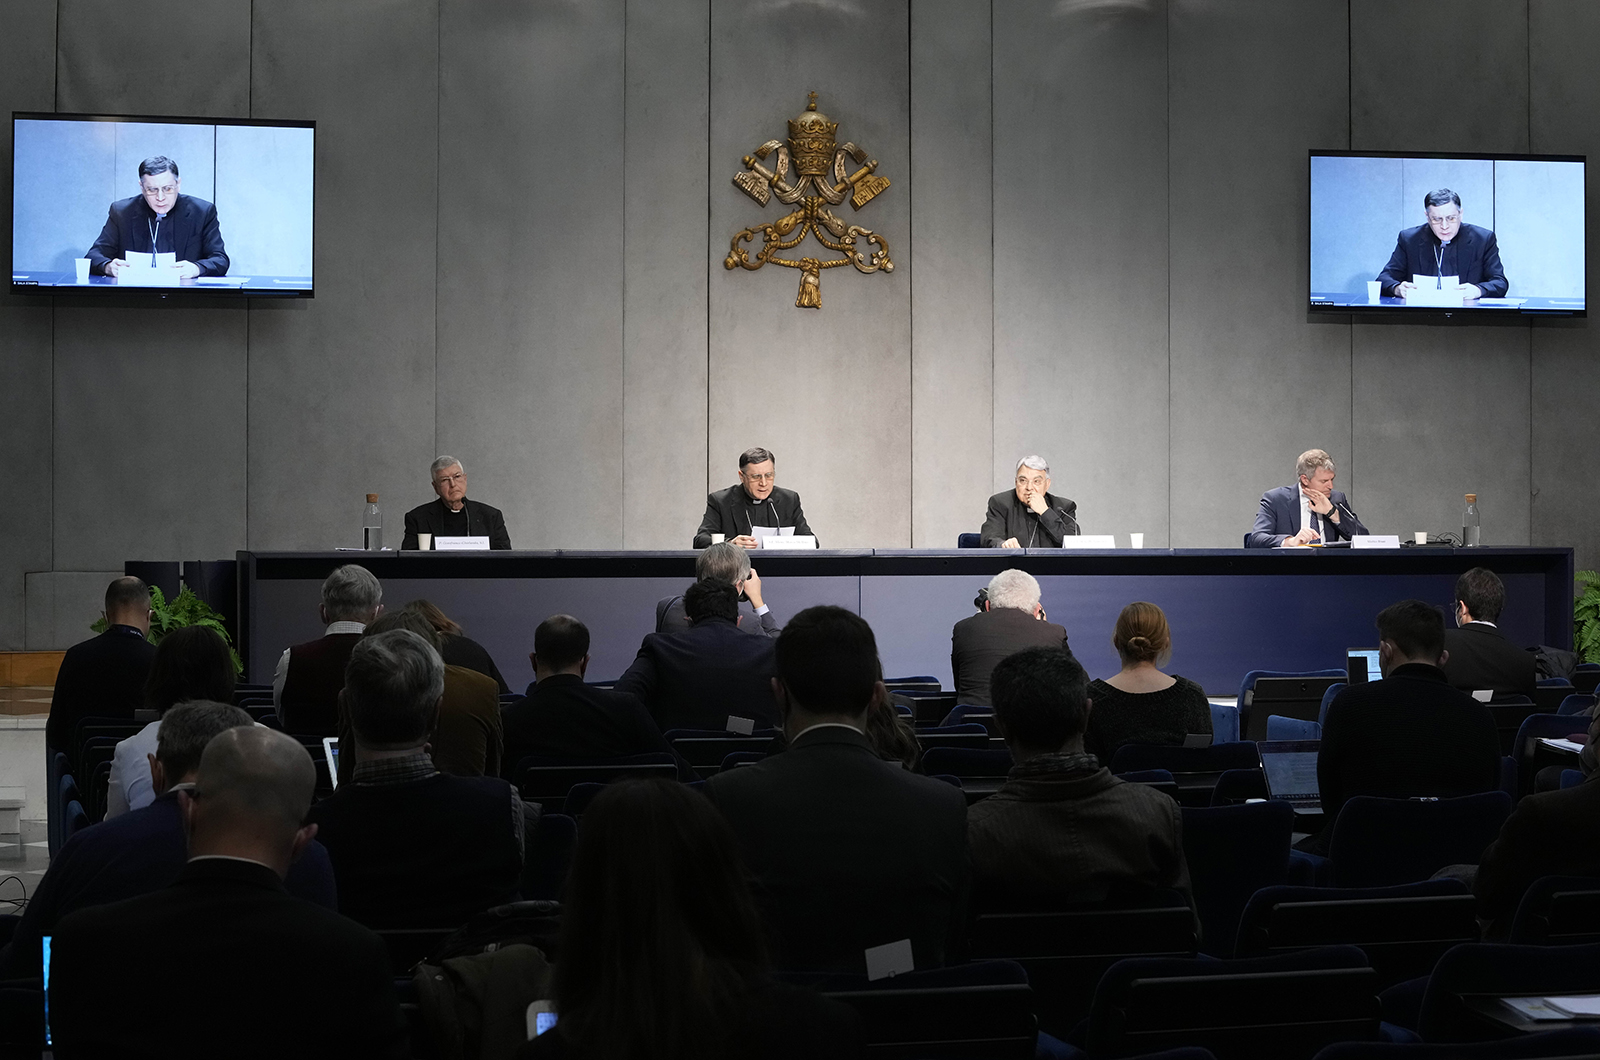 From left, Professor Gianfranco Ghirlanda, Mons. Marco Mellino, Cardinal Marcello Semeraro, and Vatican's spokesman Matteo Bruni, attend the presentation of the long-awaited reform program of the Holy See bureaucracy, during a press conference at the Vatican, Monday March 21, 2022. Pope Francis released "Praedicate Evanglium," or "Proclaiming the Gospel," a 54-page text that replaces the founding constitution "Pastor Bonus" penned by St. John Paul II in 1988. At center is Mons. Marco Mellino. (AP Photo/Domenico Stinellis)